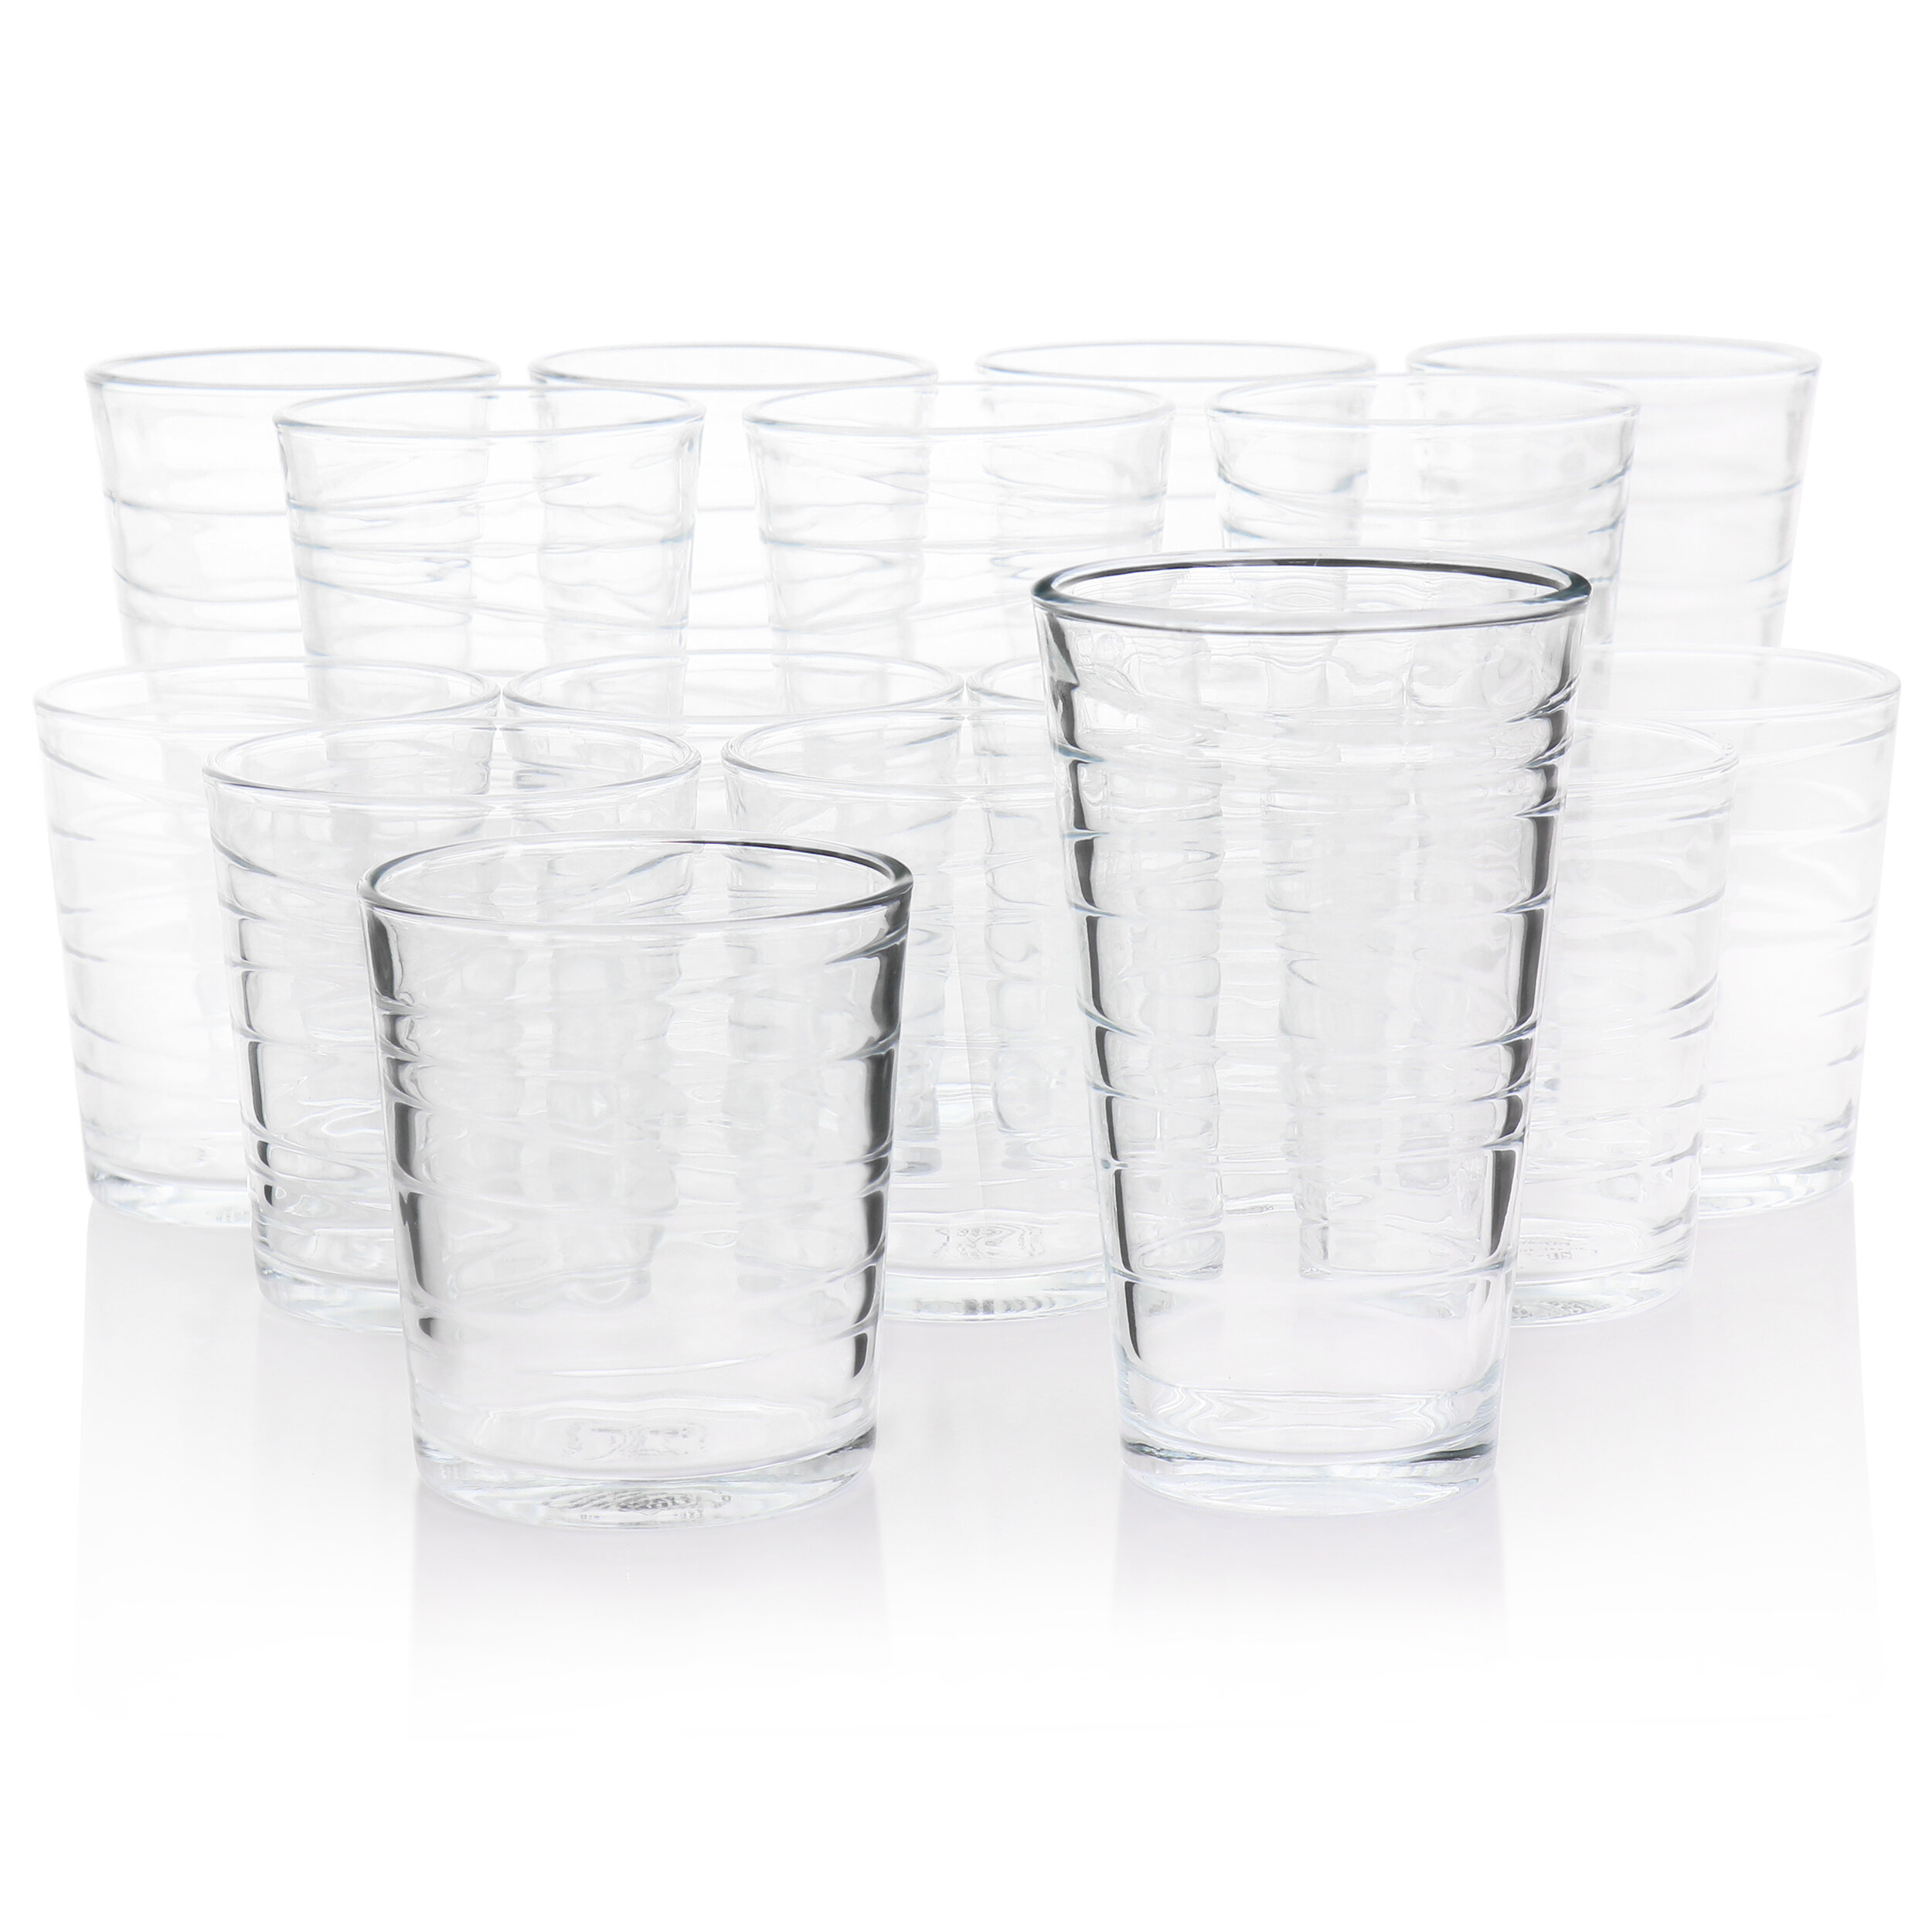 Drinking Glass Set 16 Pcs, Include Eight 16 Oz & Eight 11 Oz Glasses